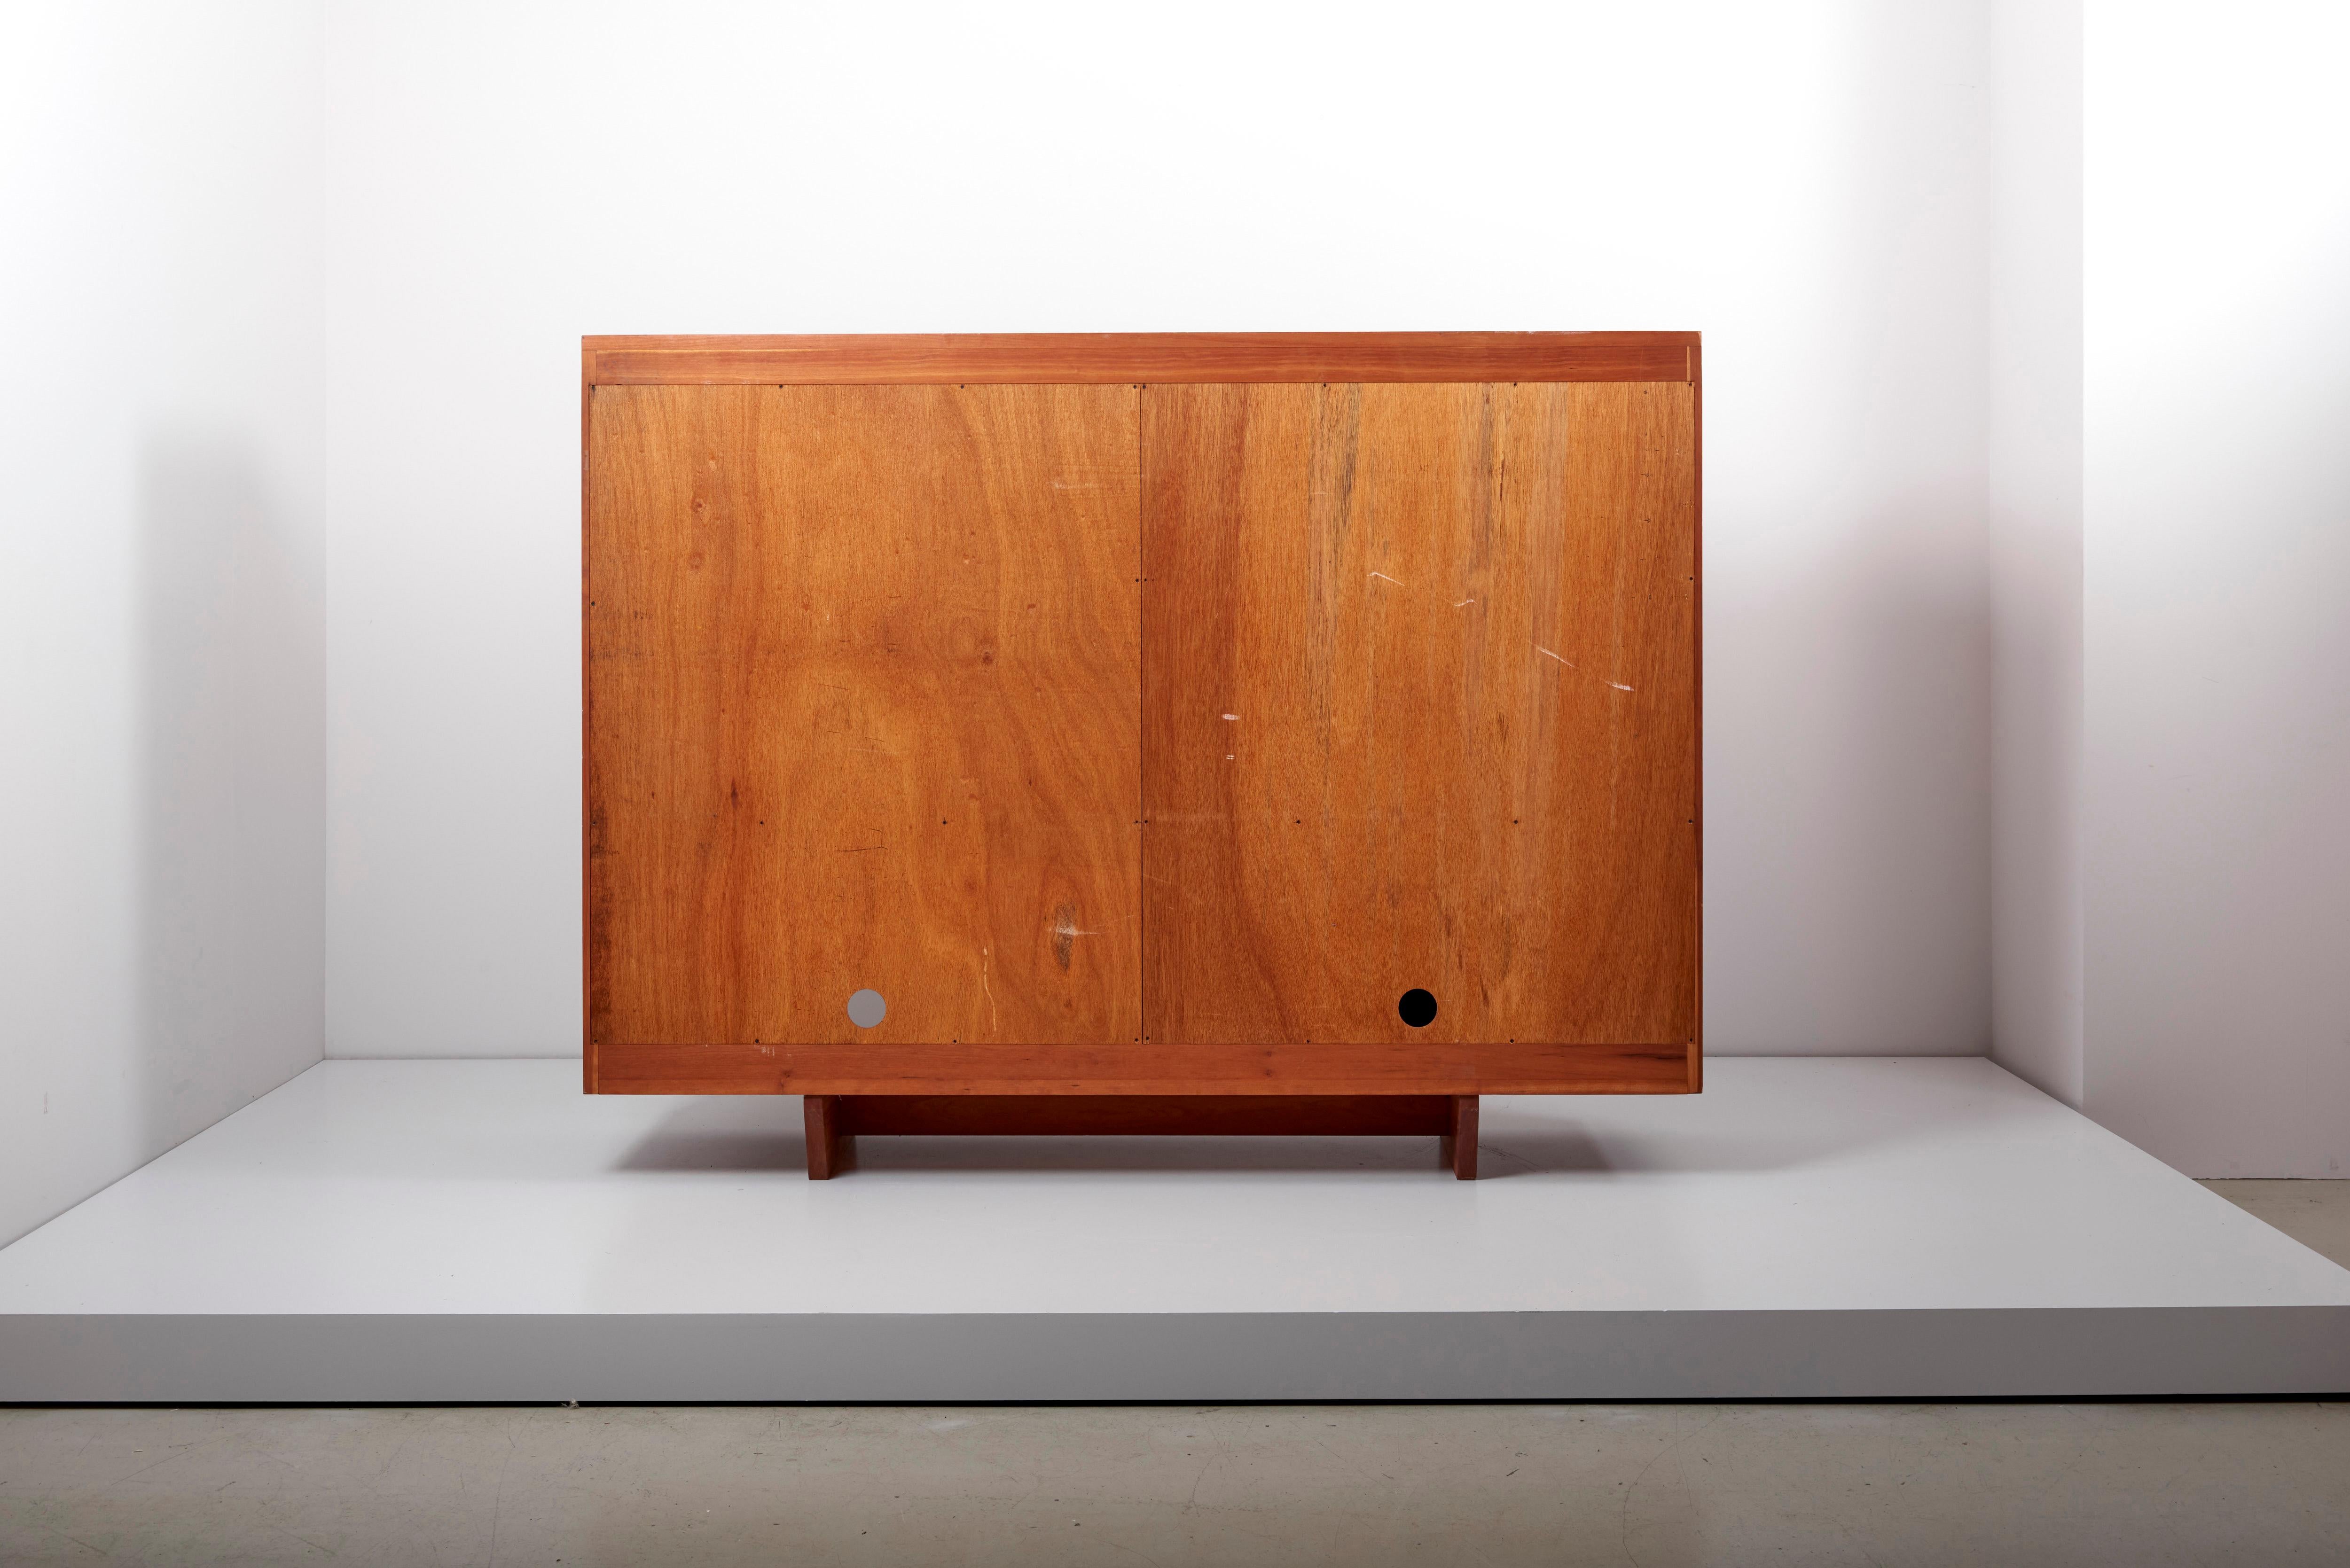 Studio Craft Cabinet by Arden Riddle, US, 1960s For Sale 9